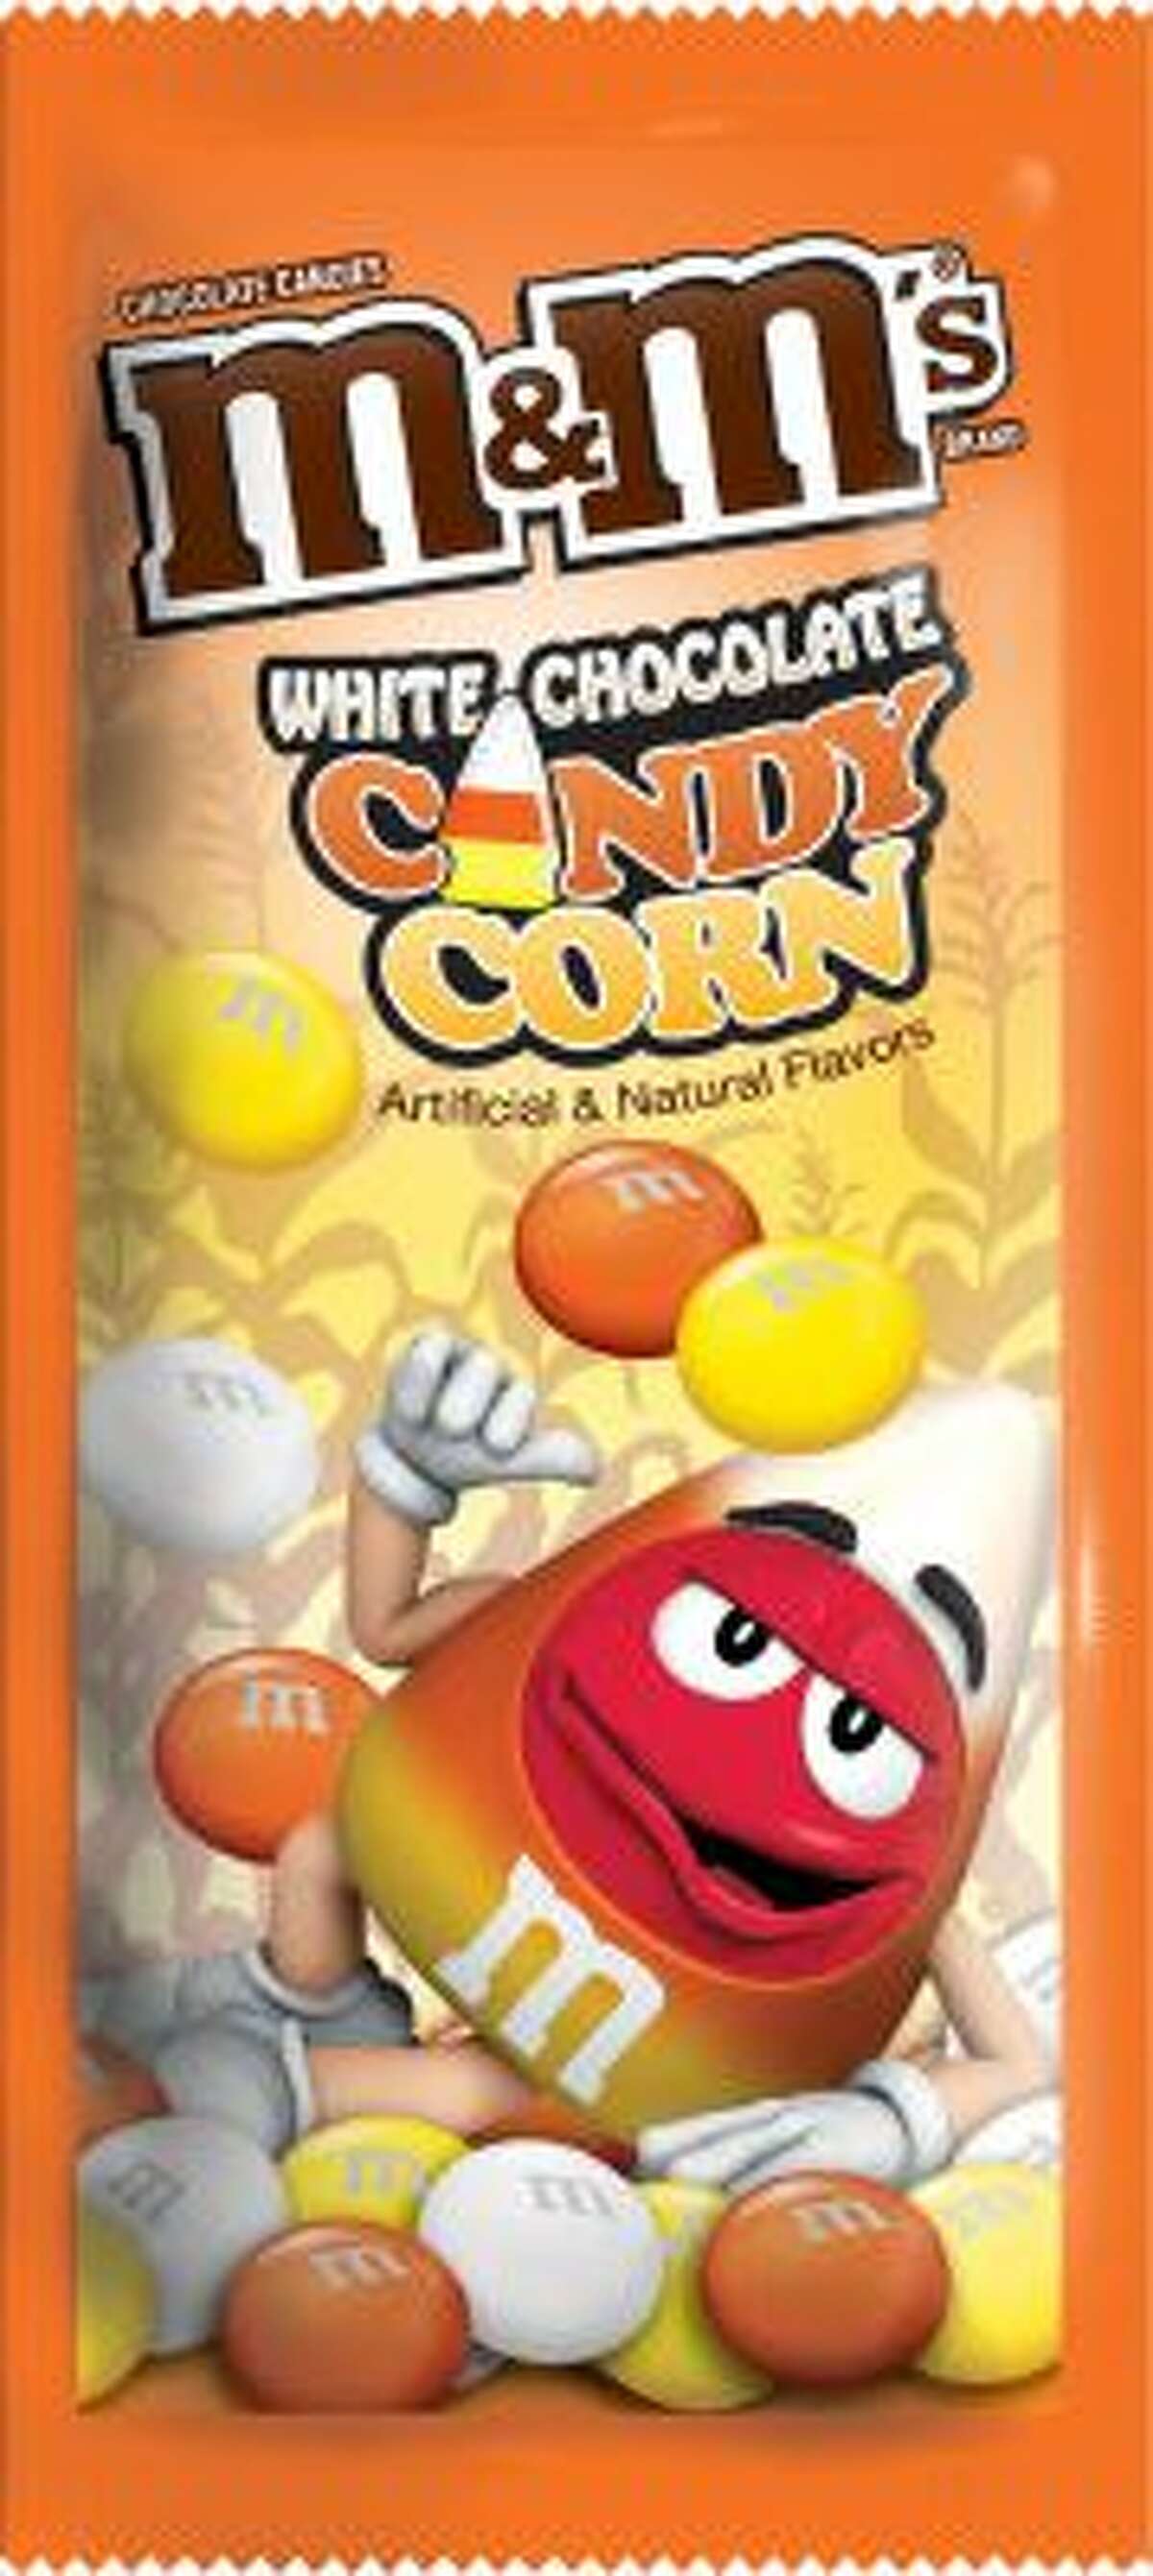 Mars Chocolate North America introduces new frightfully fun Halloween treats, including M&M'S(R) Brand Candy Corn White Chocolate Candies.